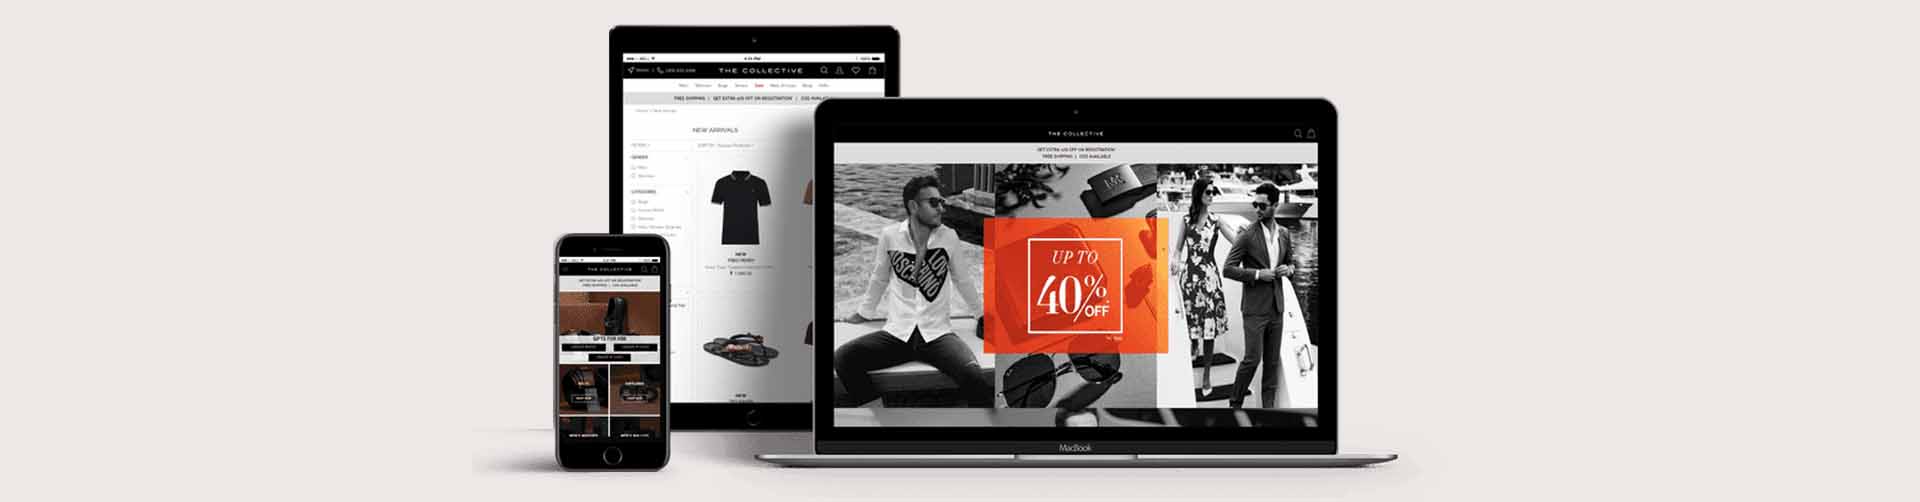 E-commerce Website for your clothing brand